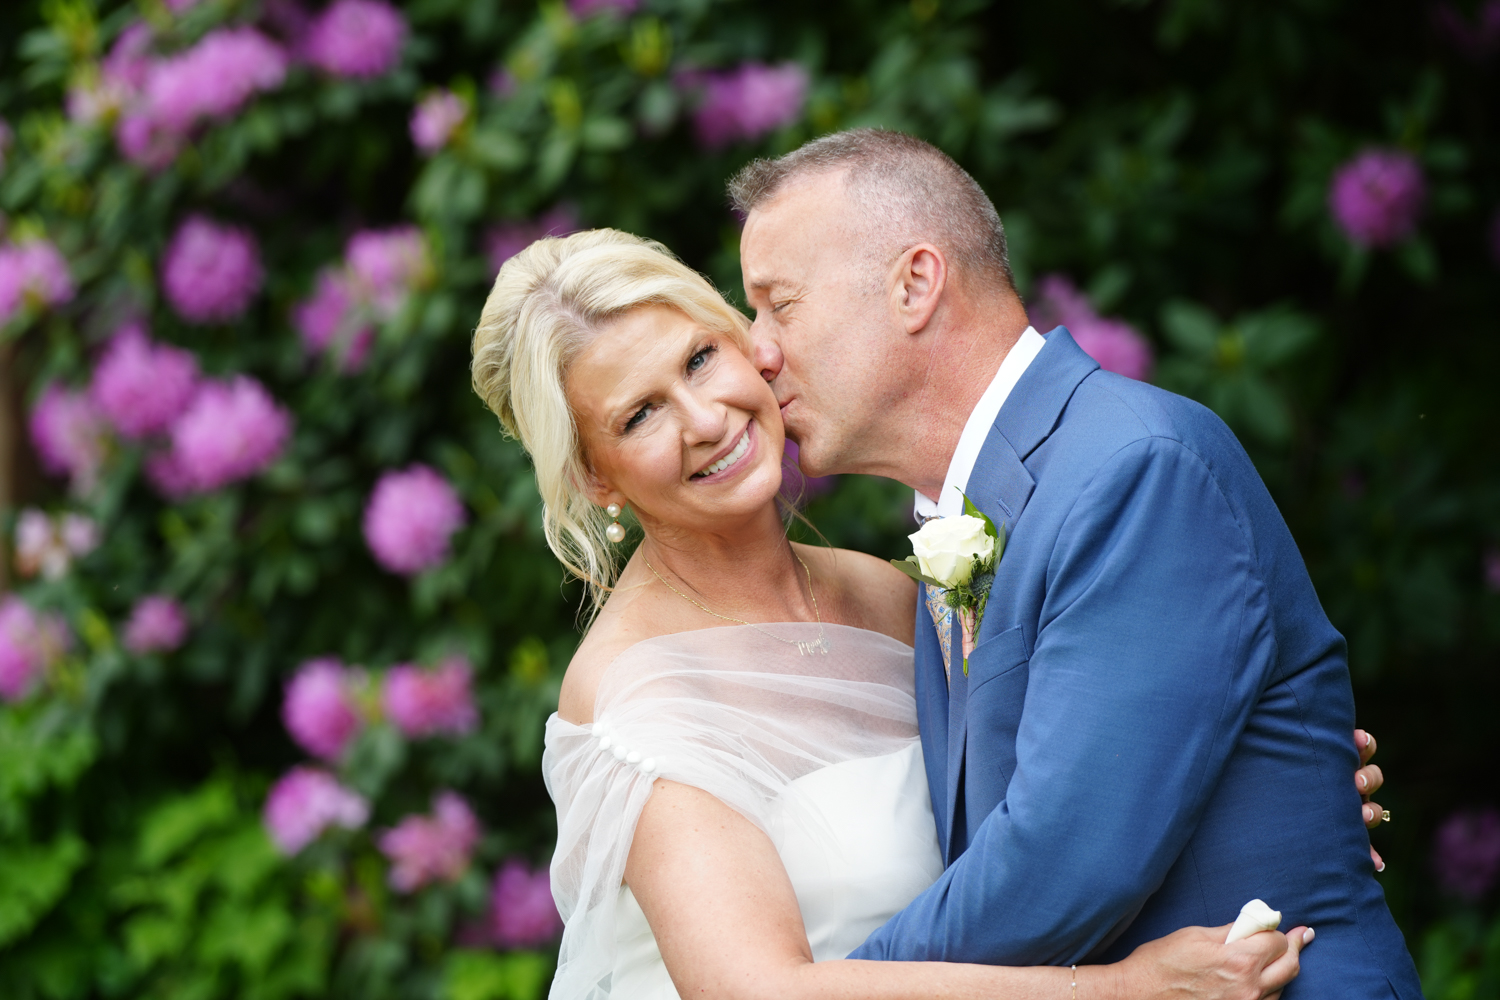 middle aged groom kissing his bride on their wedding day with purple rhododendron in bloom